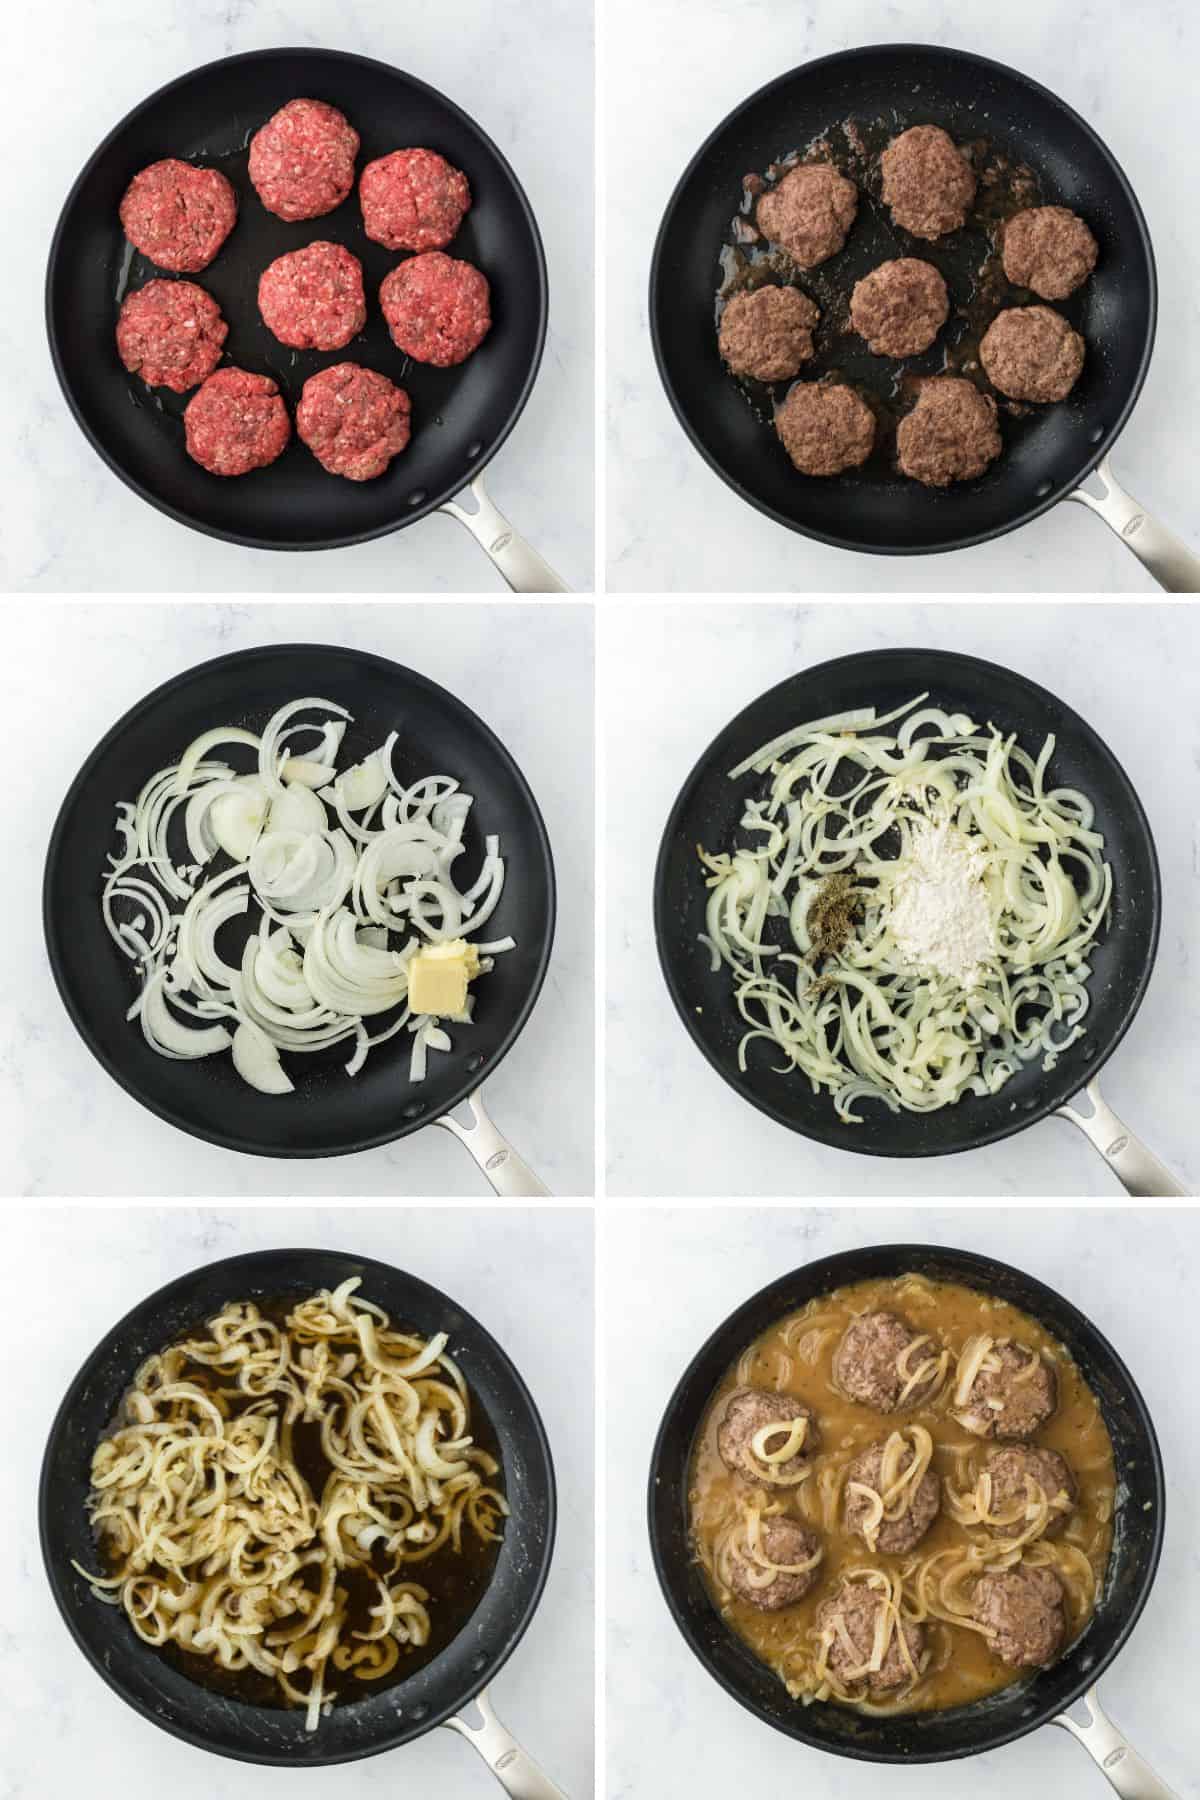 A step by step image collage on how to make hamburger steak with cooking the patties, cooking the onions, adding the broth mixture, and returning the patties to the skillet to finish cooking